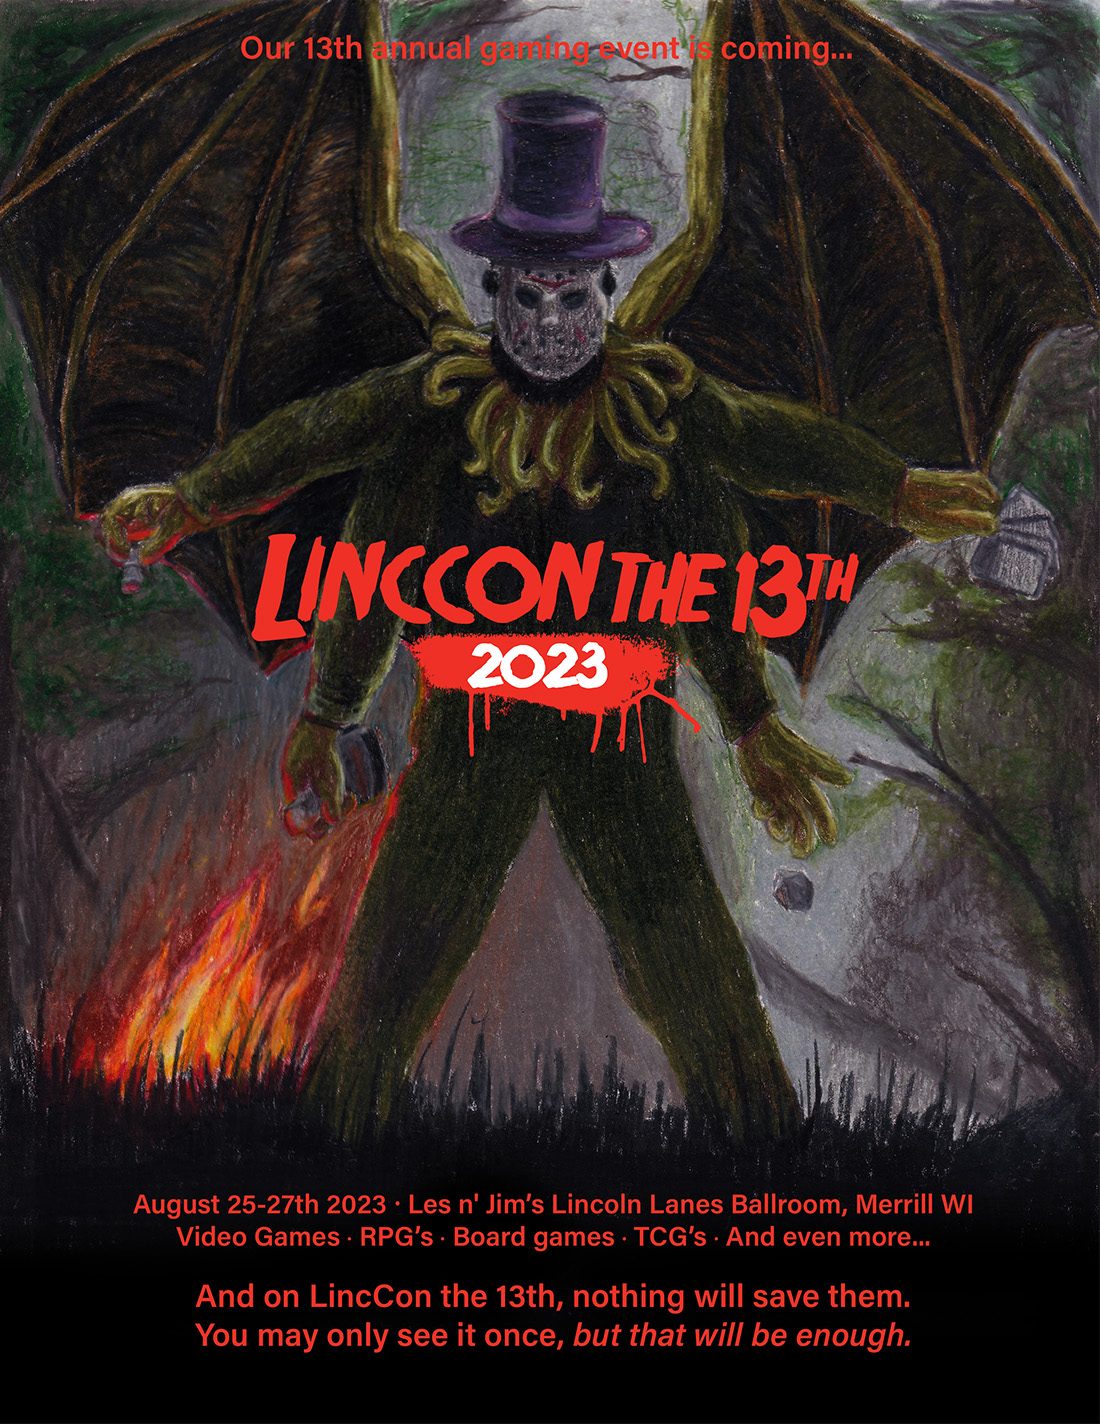 Our 13th annual gaming event is coming... LincCon the 13th 2023 August 25-27th 2023  Les n' Jim’s Lincoln Lanes Ballroom, Merrill WIVideo Games · RPG’s · Board games · TCG’s · And even more... And on LincCon the 13th, nothing will save them. You may only see it once, but that will be enough.